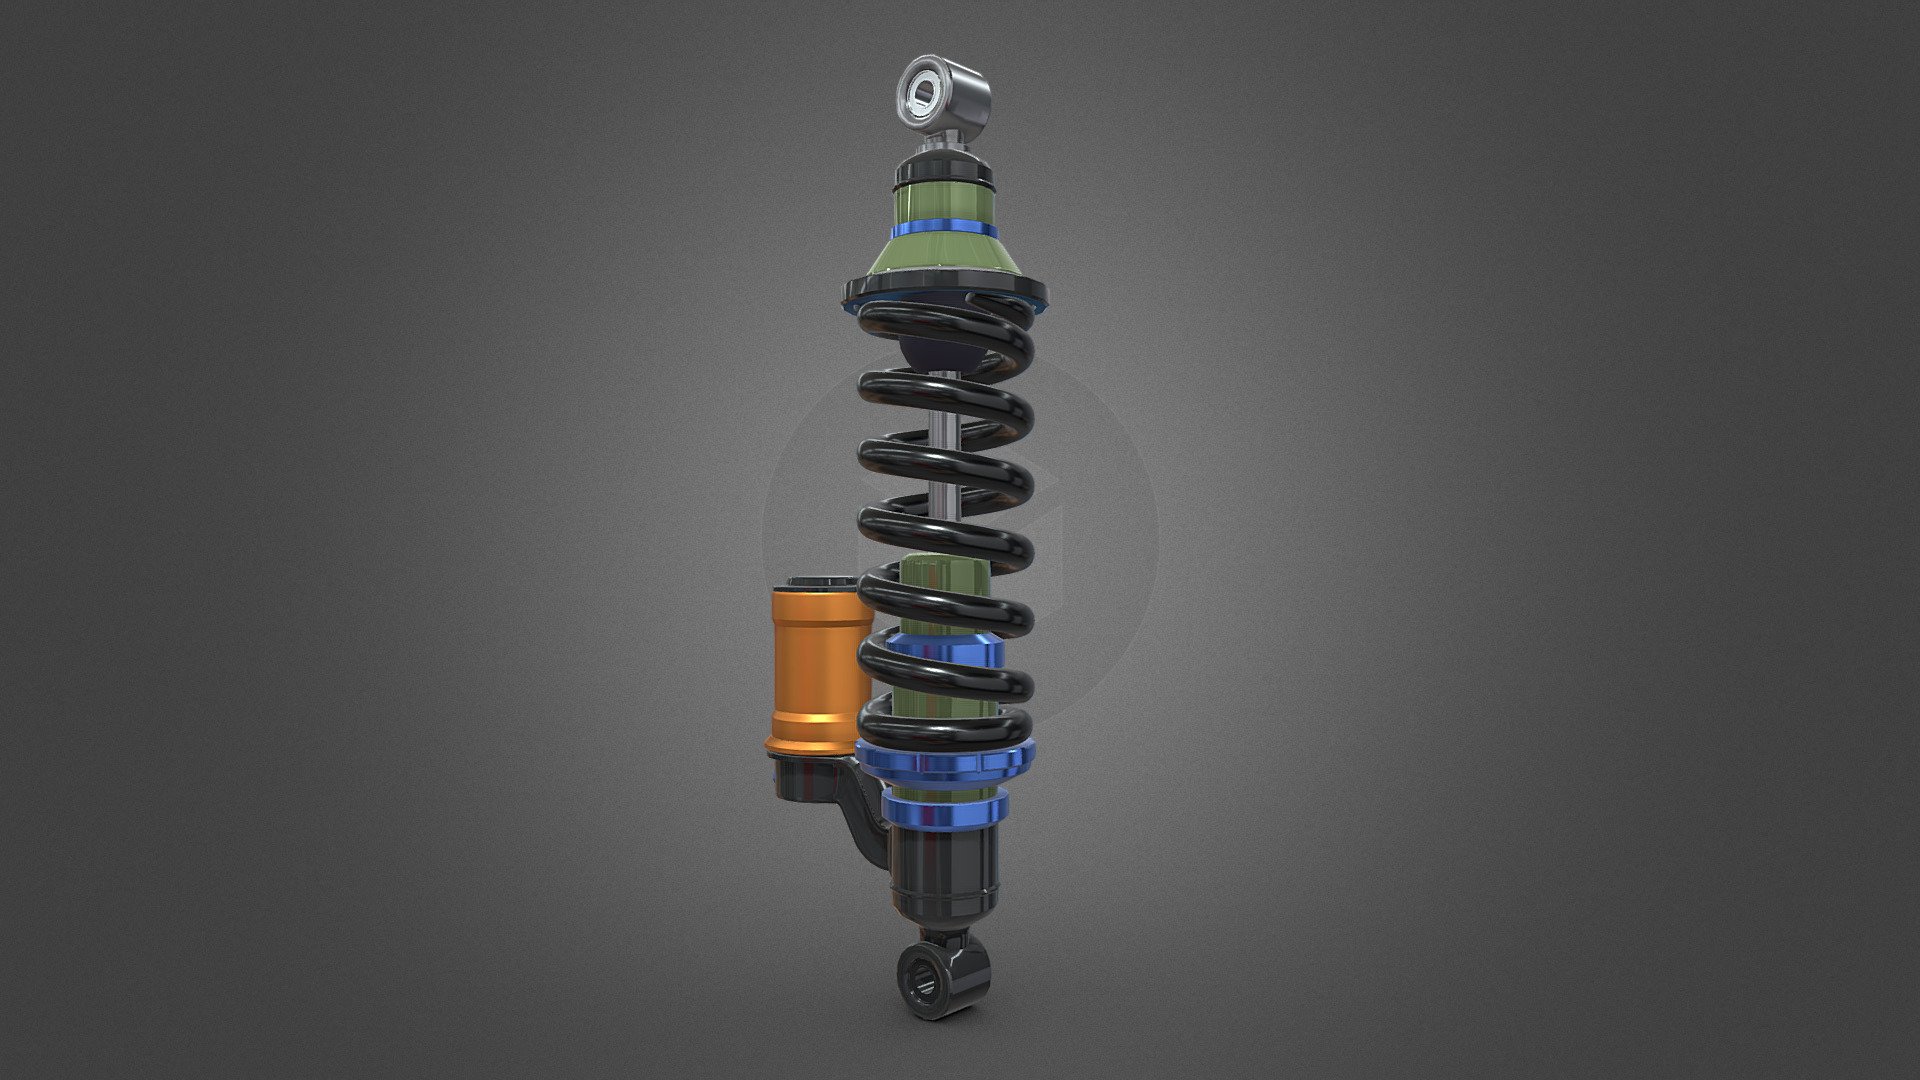 A part for my latest project. Brandless sports shock absorber created to be used in sports car suspensions in other projects. I was going for the possibility to use this model in multiple projects later to save time and make them more detail 3d model